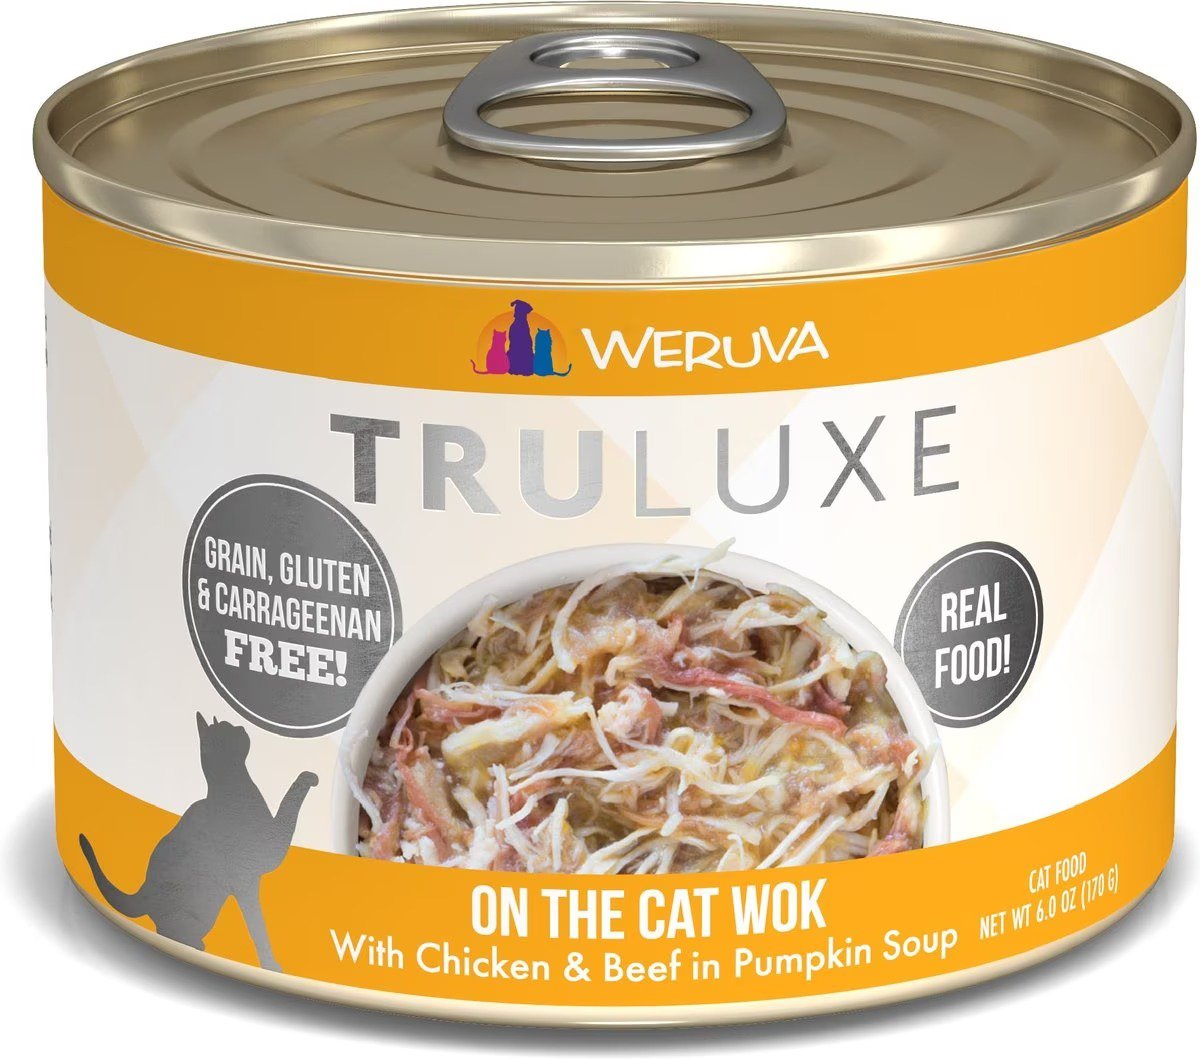 Weruva Truluxe On The Cat Wok with Chicken & Beef Canned Cat Food, 6-oz can, case of 24